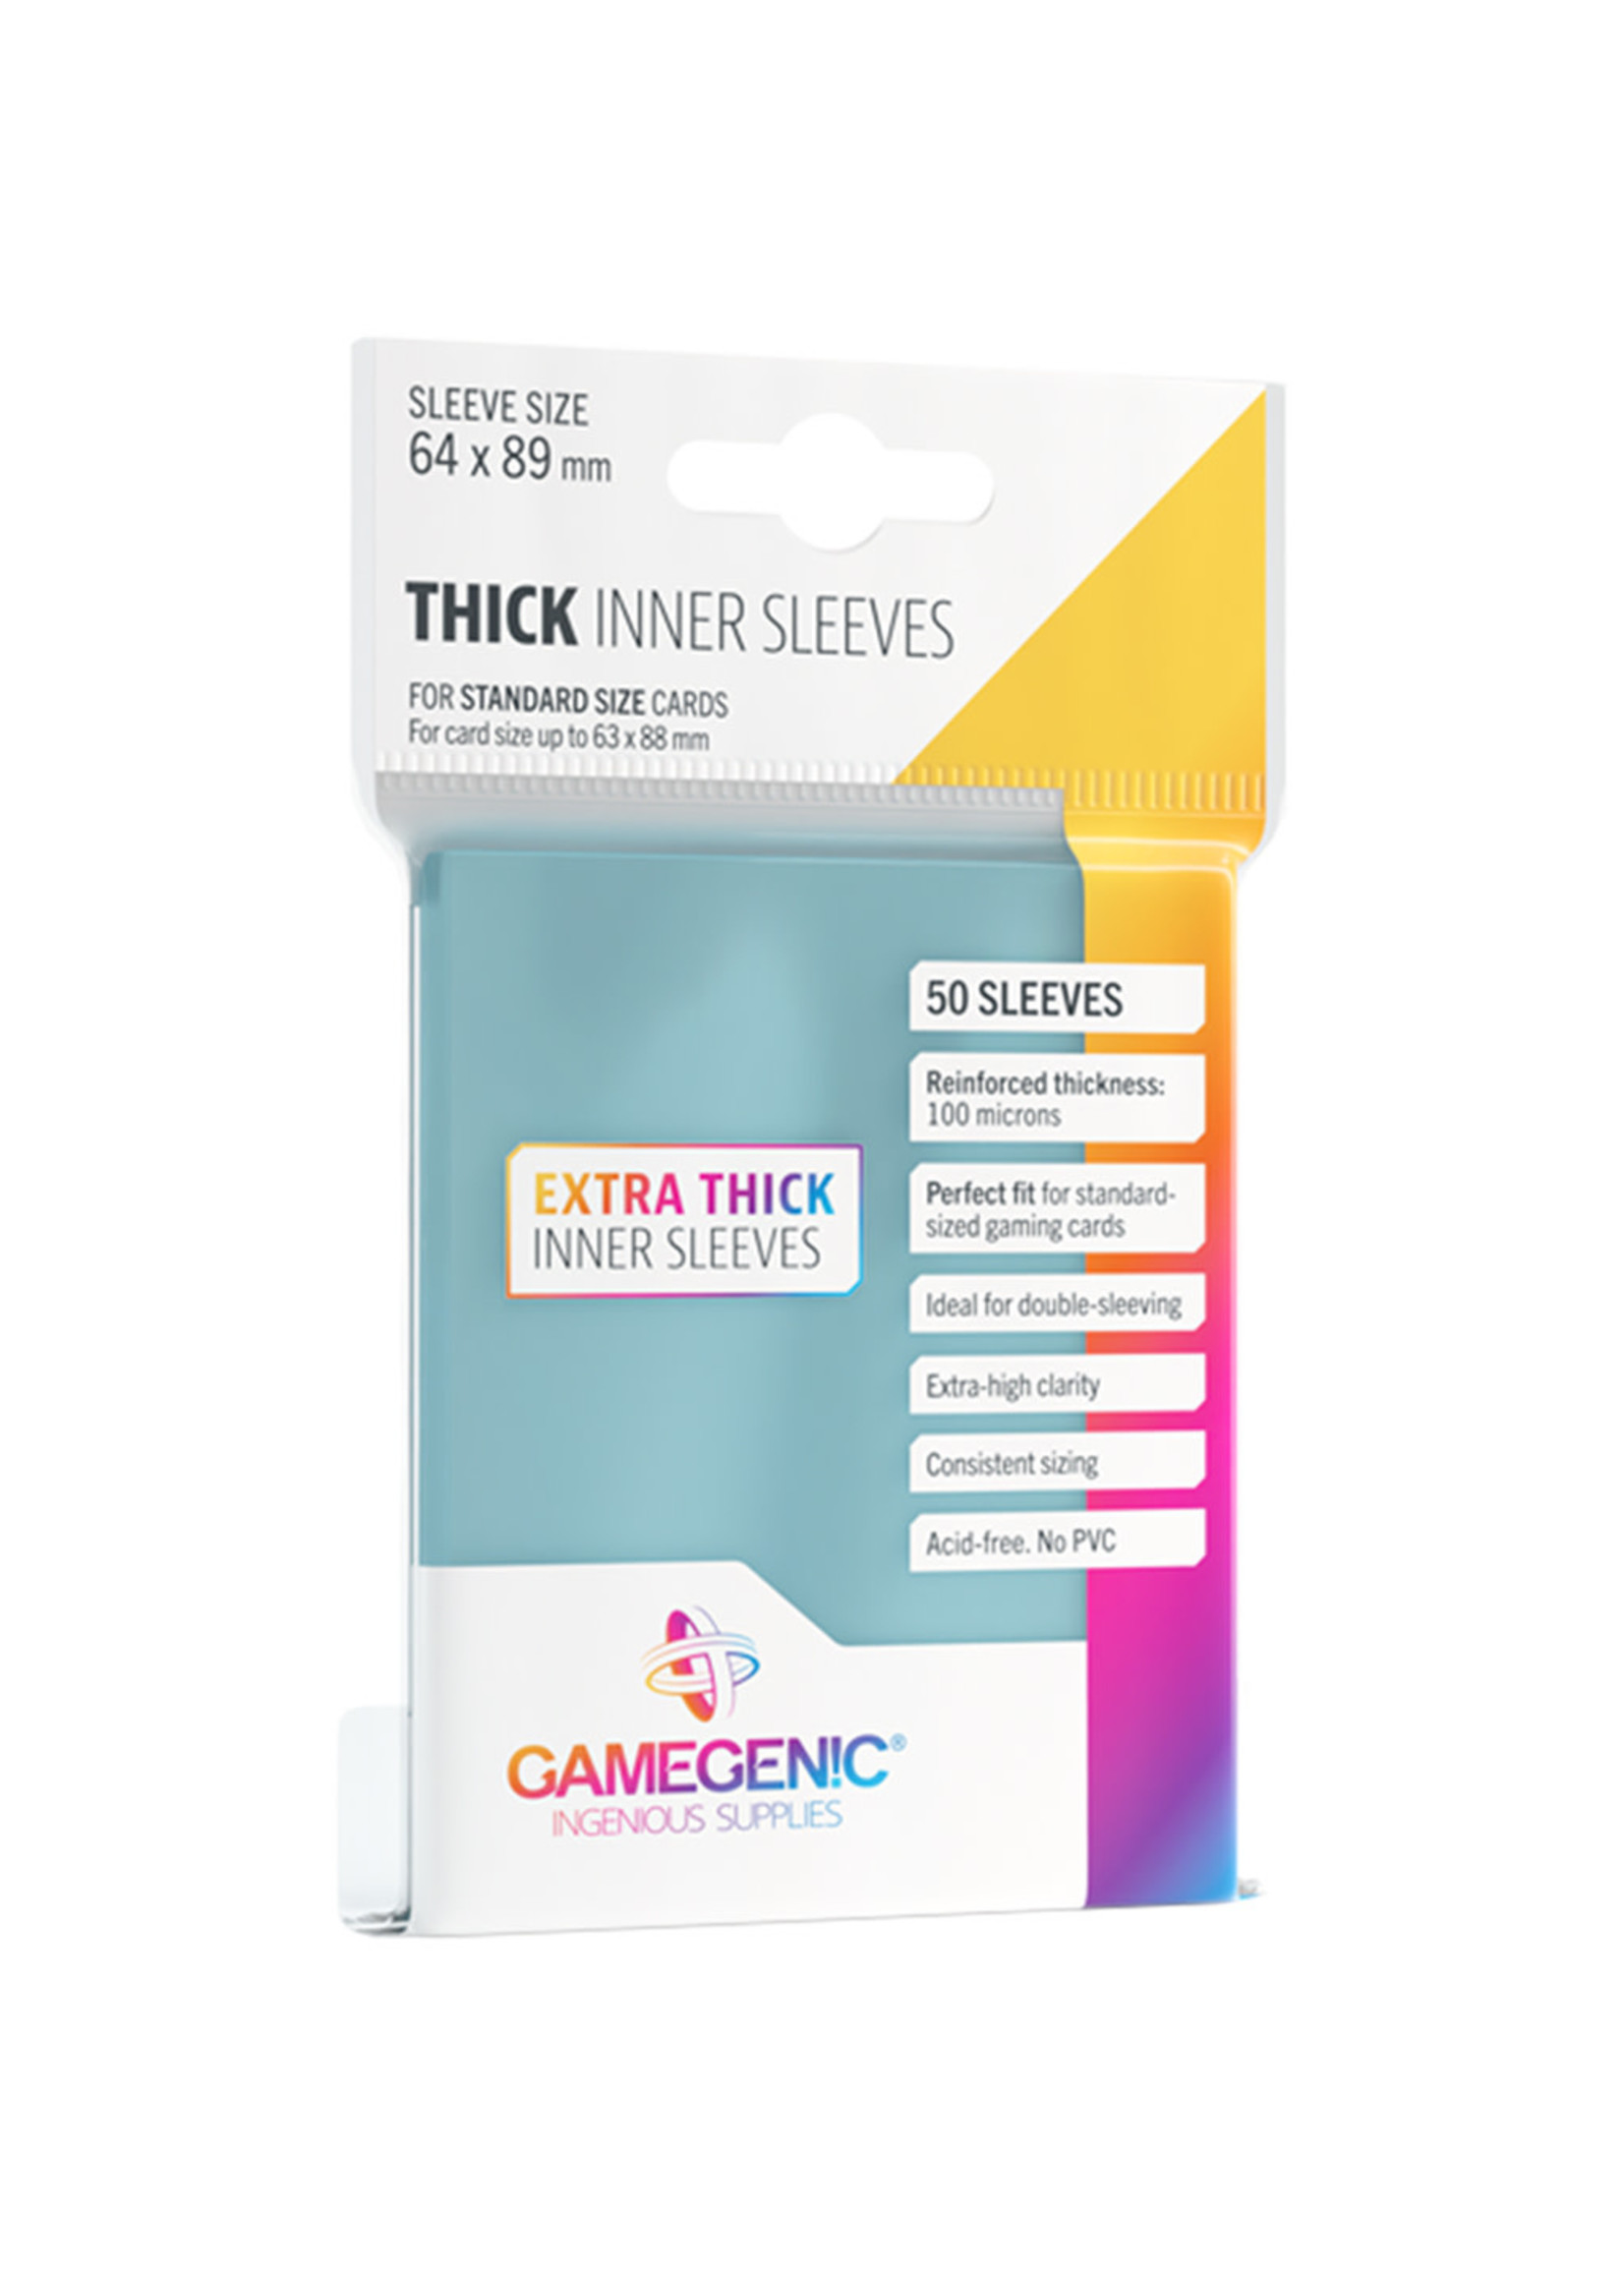 Gamegenic Thick Inner Sleeves